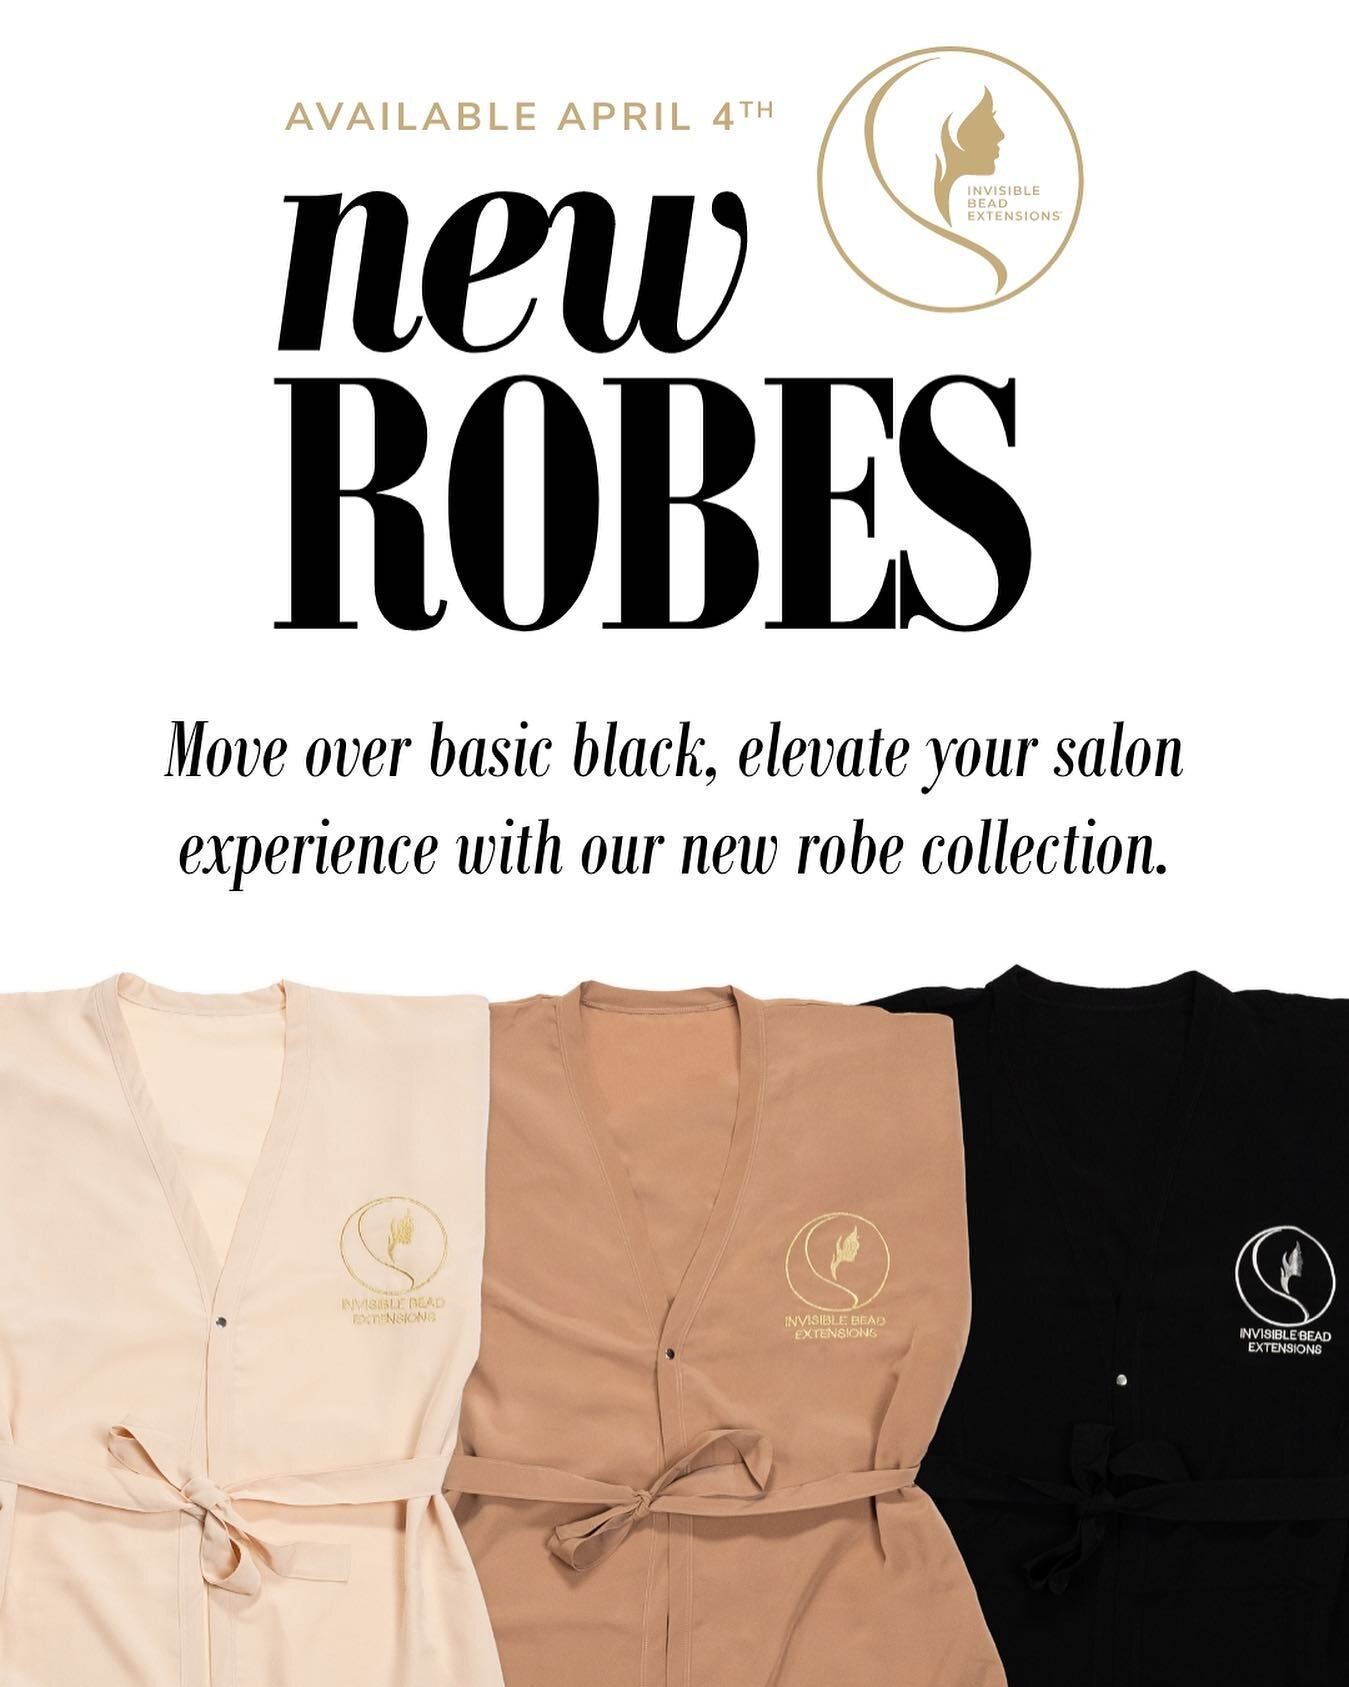 This might seem like a super salesy post but it&rsquo;s actually time for a story. 

About 9 months ago I had this idea to add a different color to our IBE&reg; Stylist robes. Since we previously only had black, As a brunette with lots of brunette cl